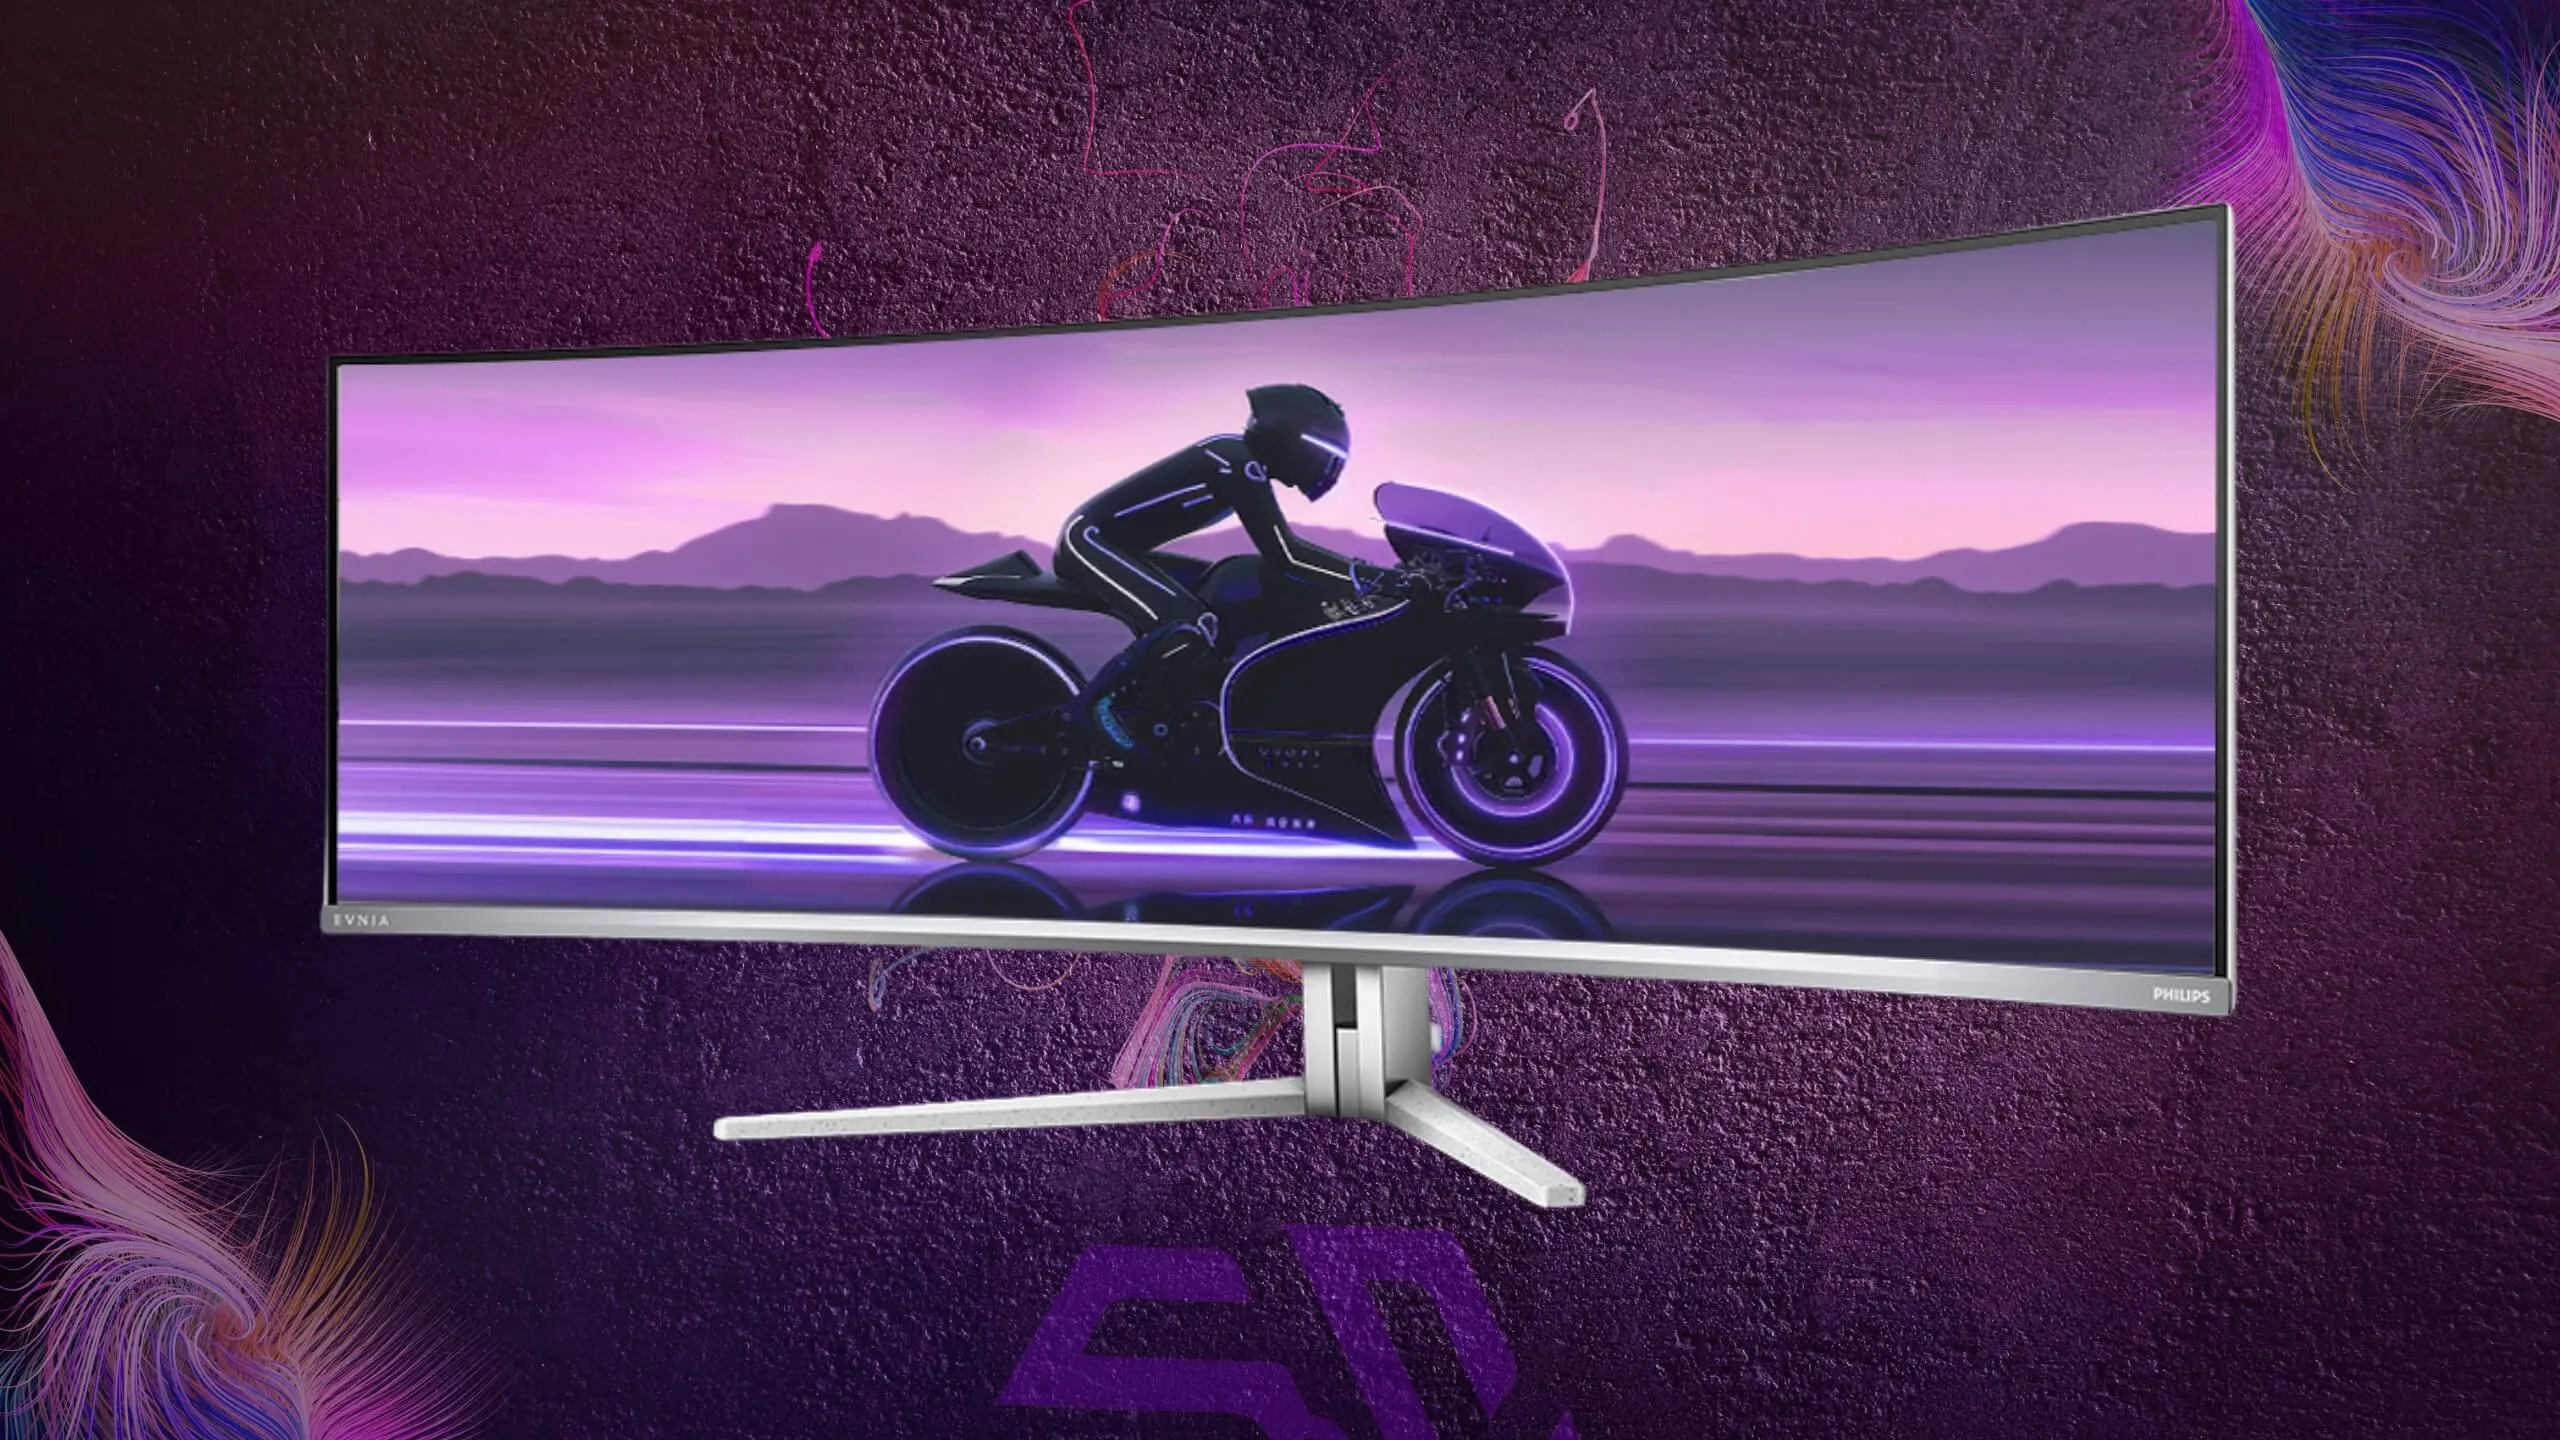 Curved Philips monitor with biker on the display